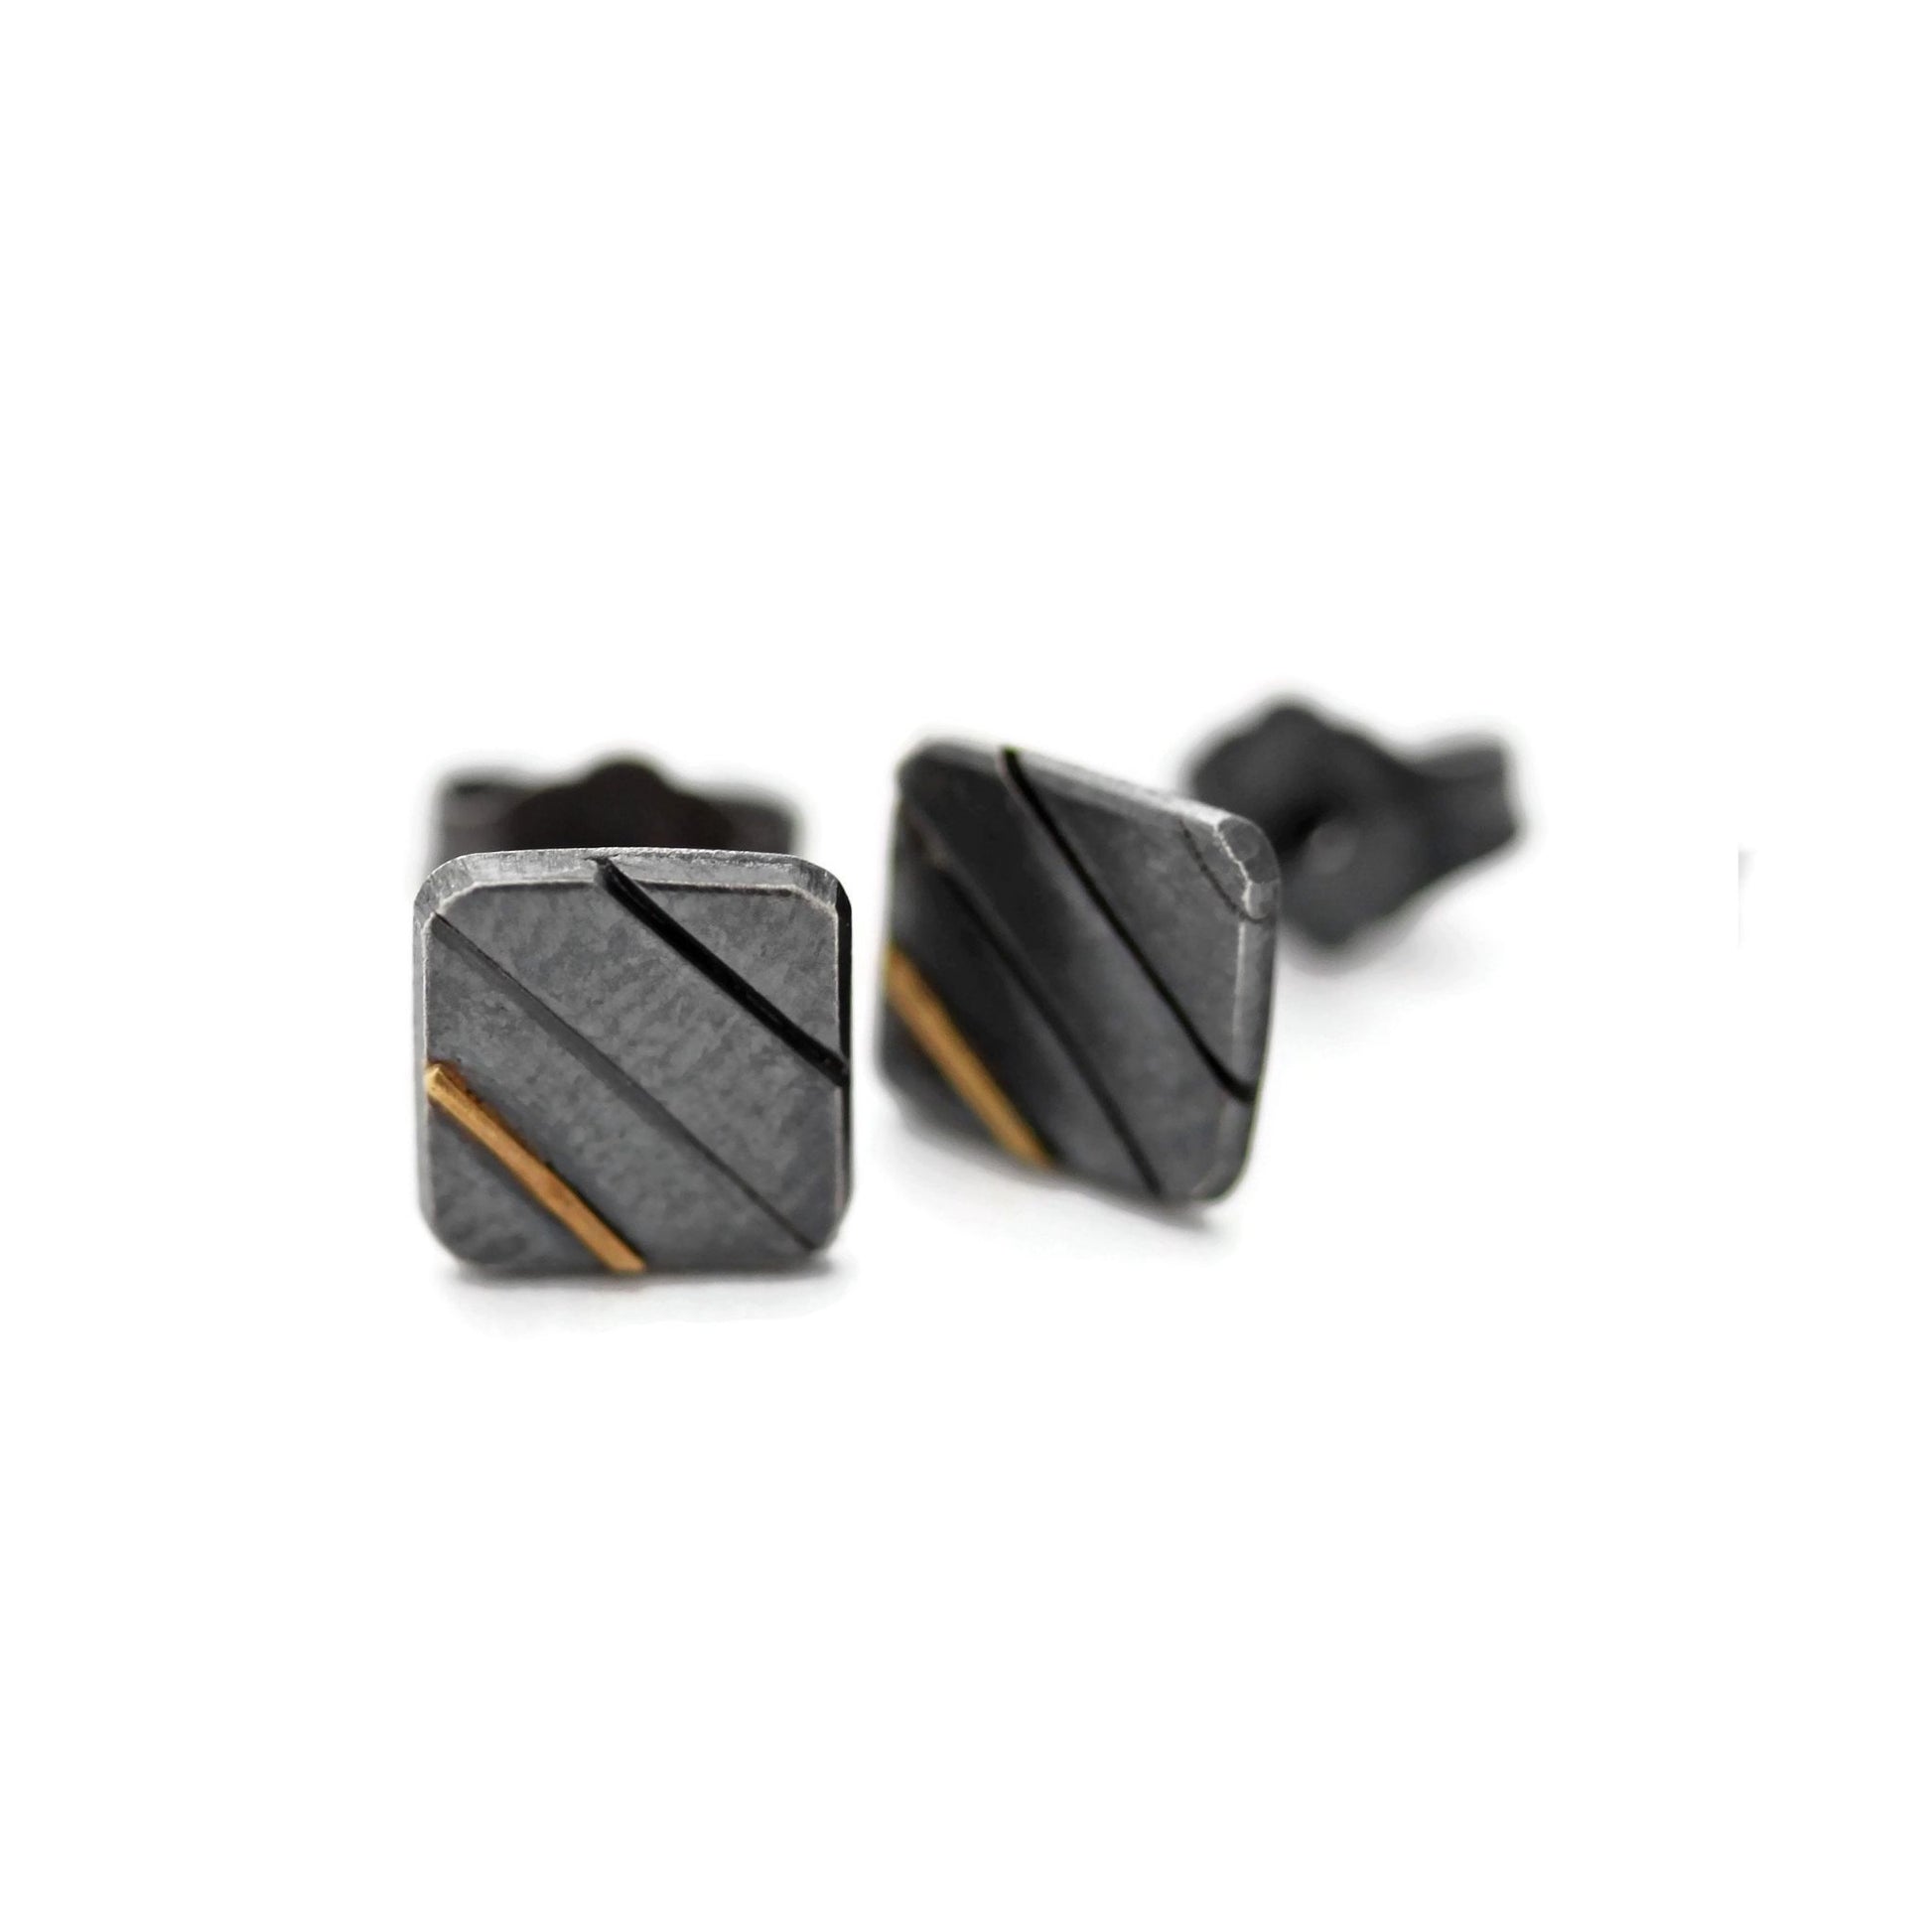 Square stud earrings in oxidized silver and gold